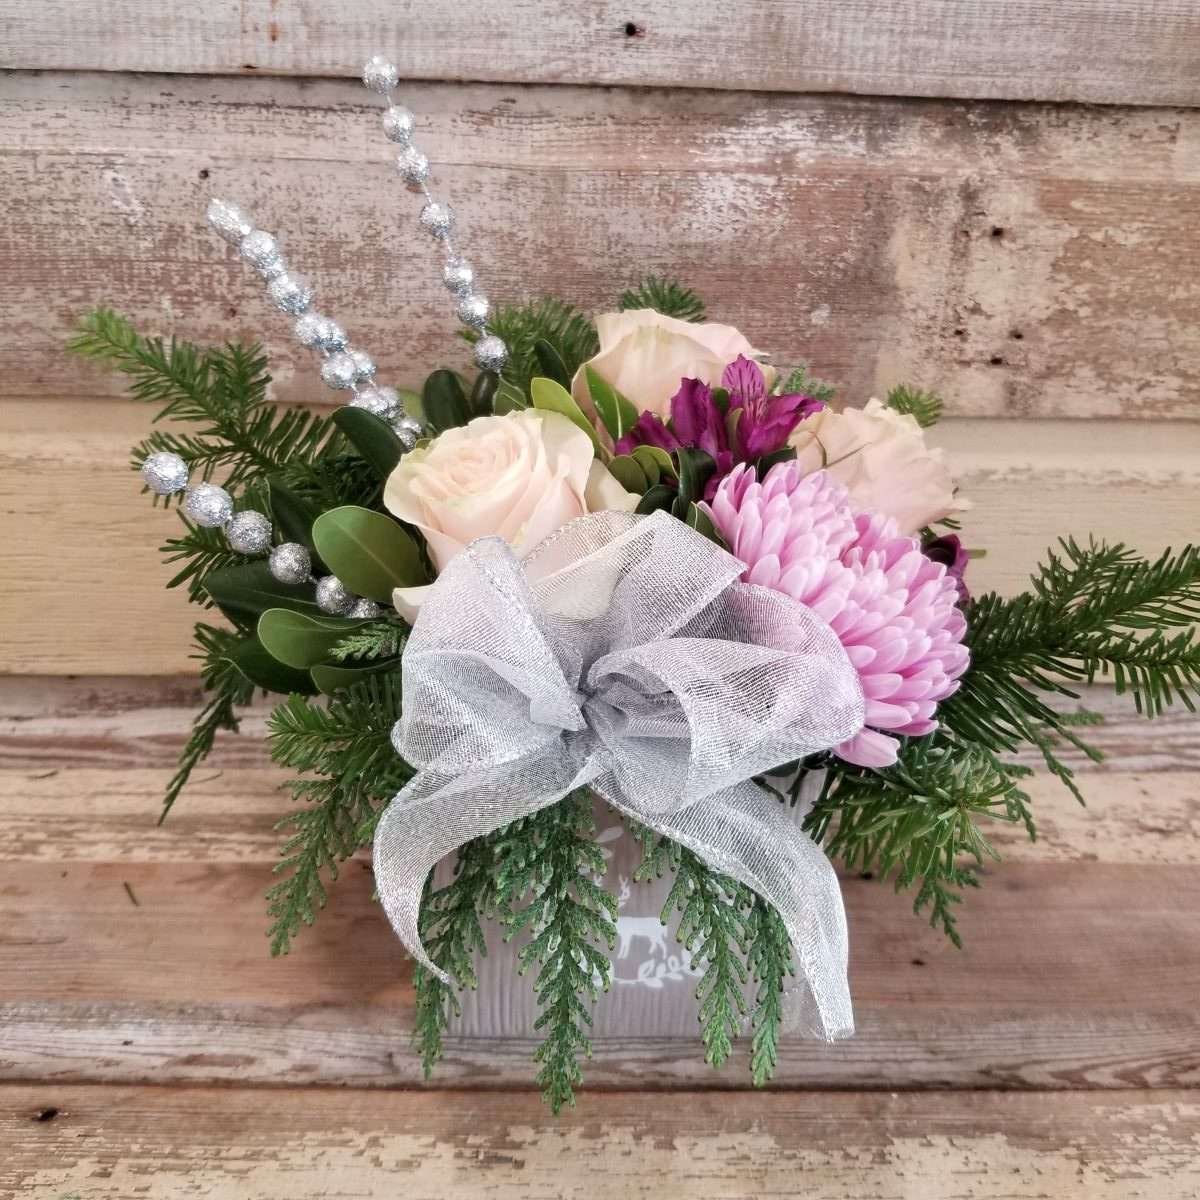 Silver and Purple Flower Arrangegment for christmas or winter